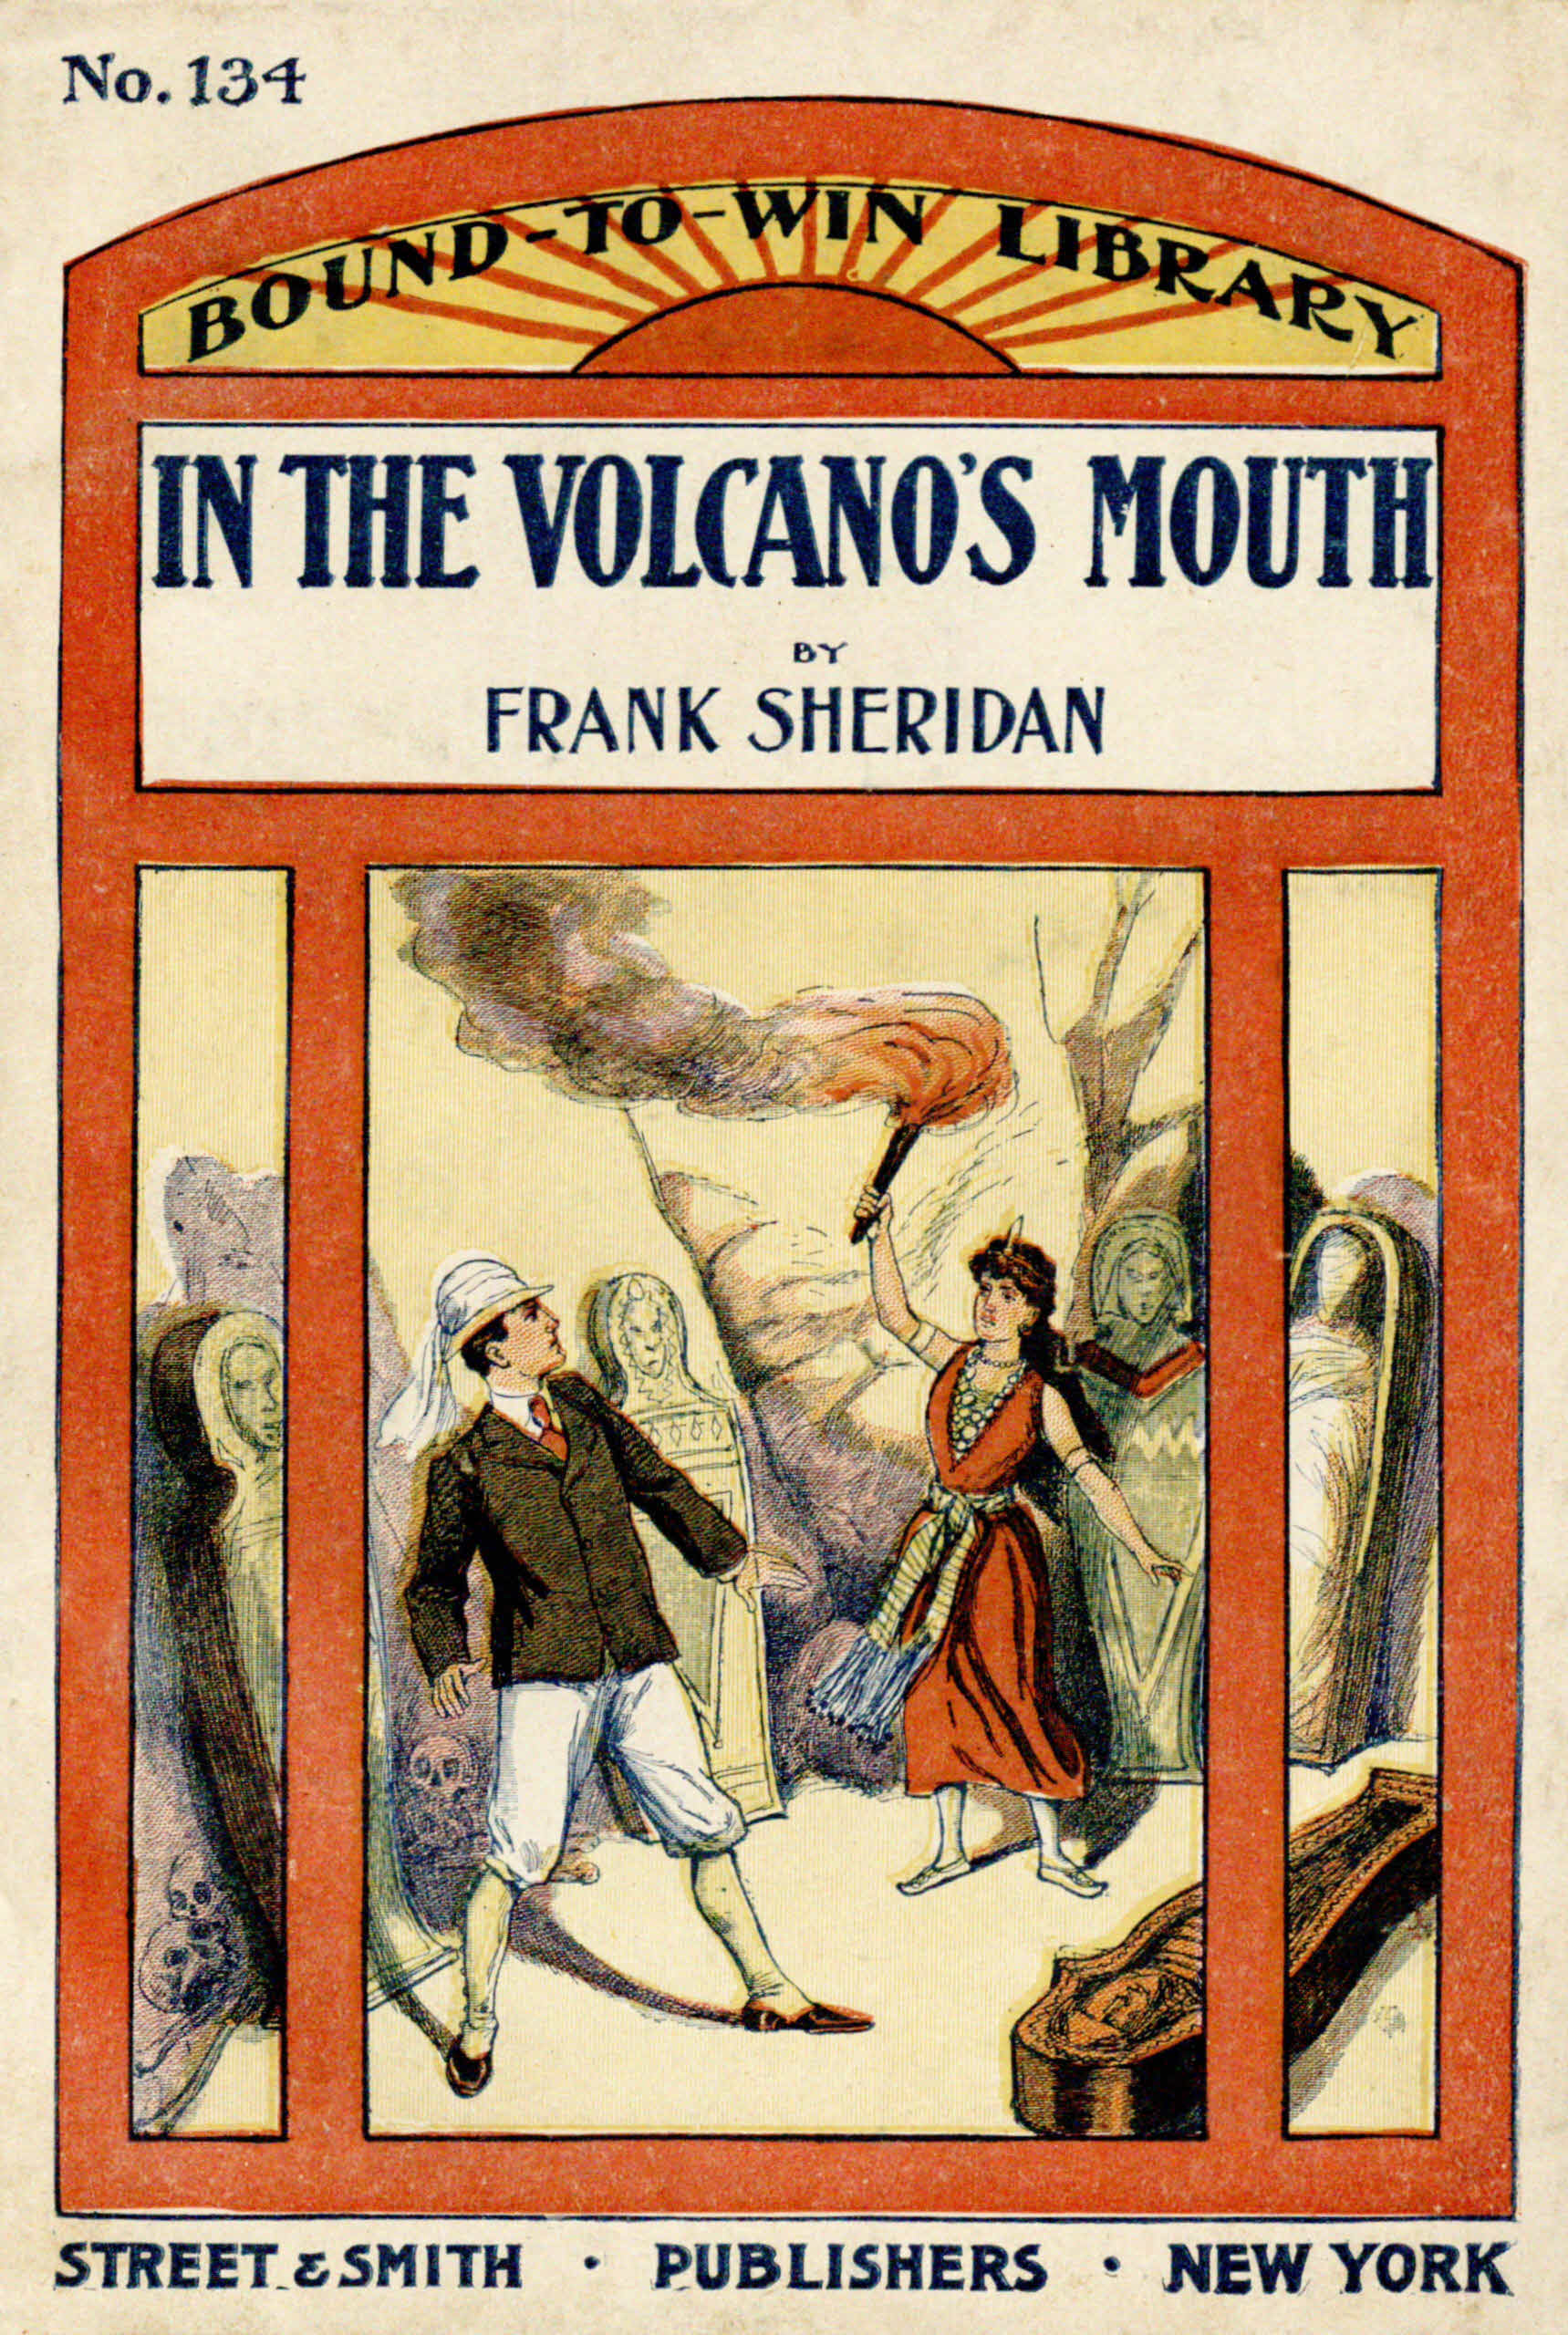 In the volcano's mouth; or, A boy against an army